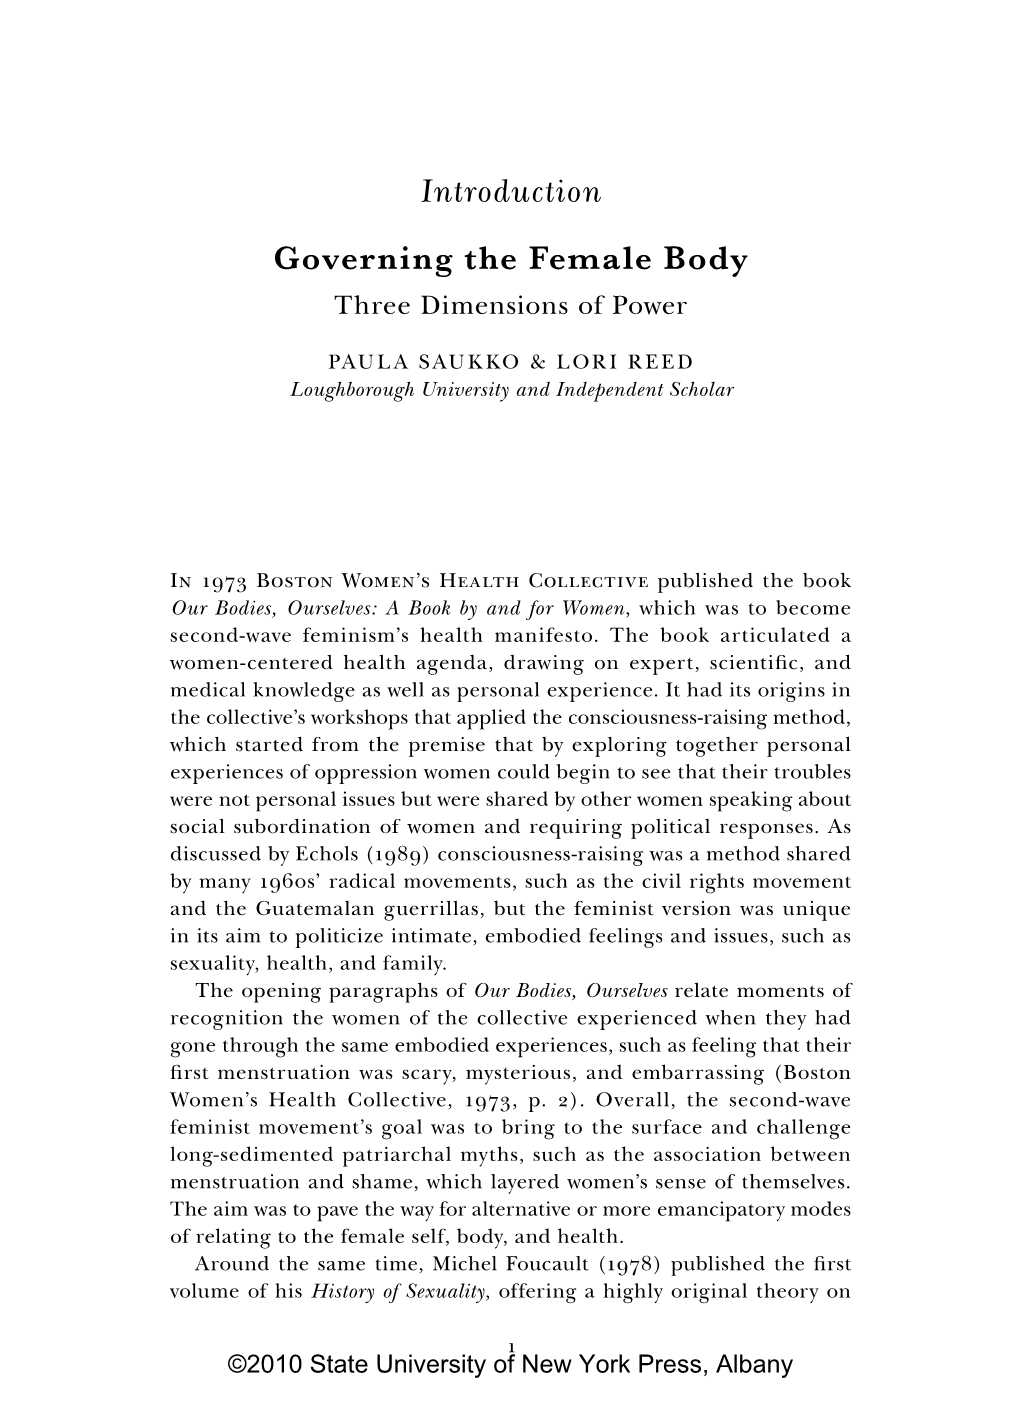 Governing the Female Body Three Dimensions of Power